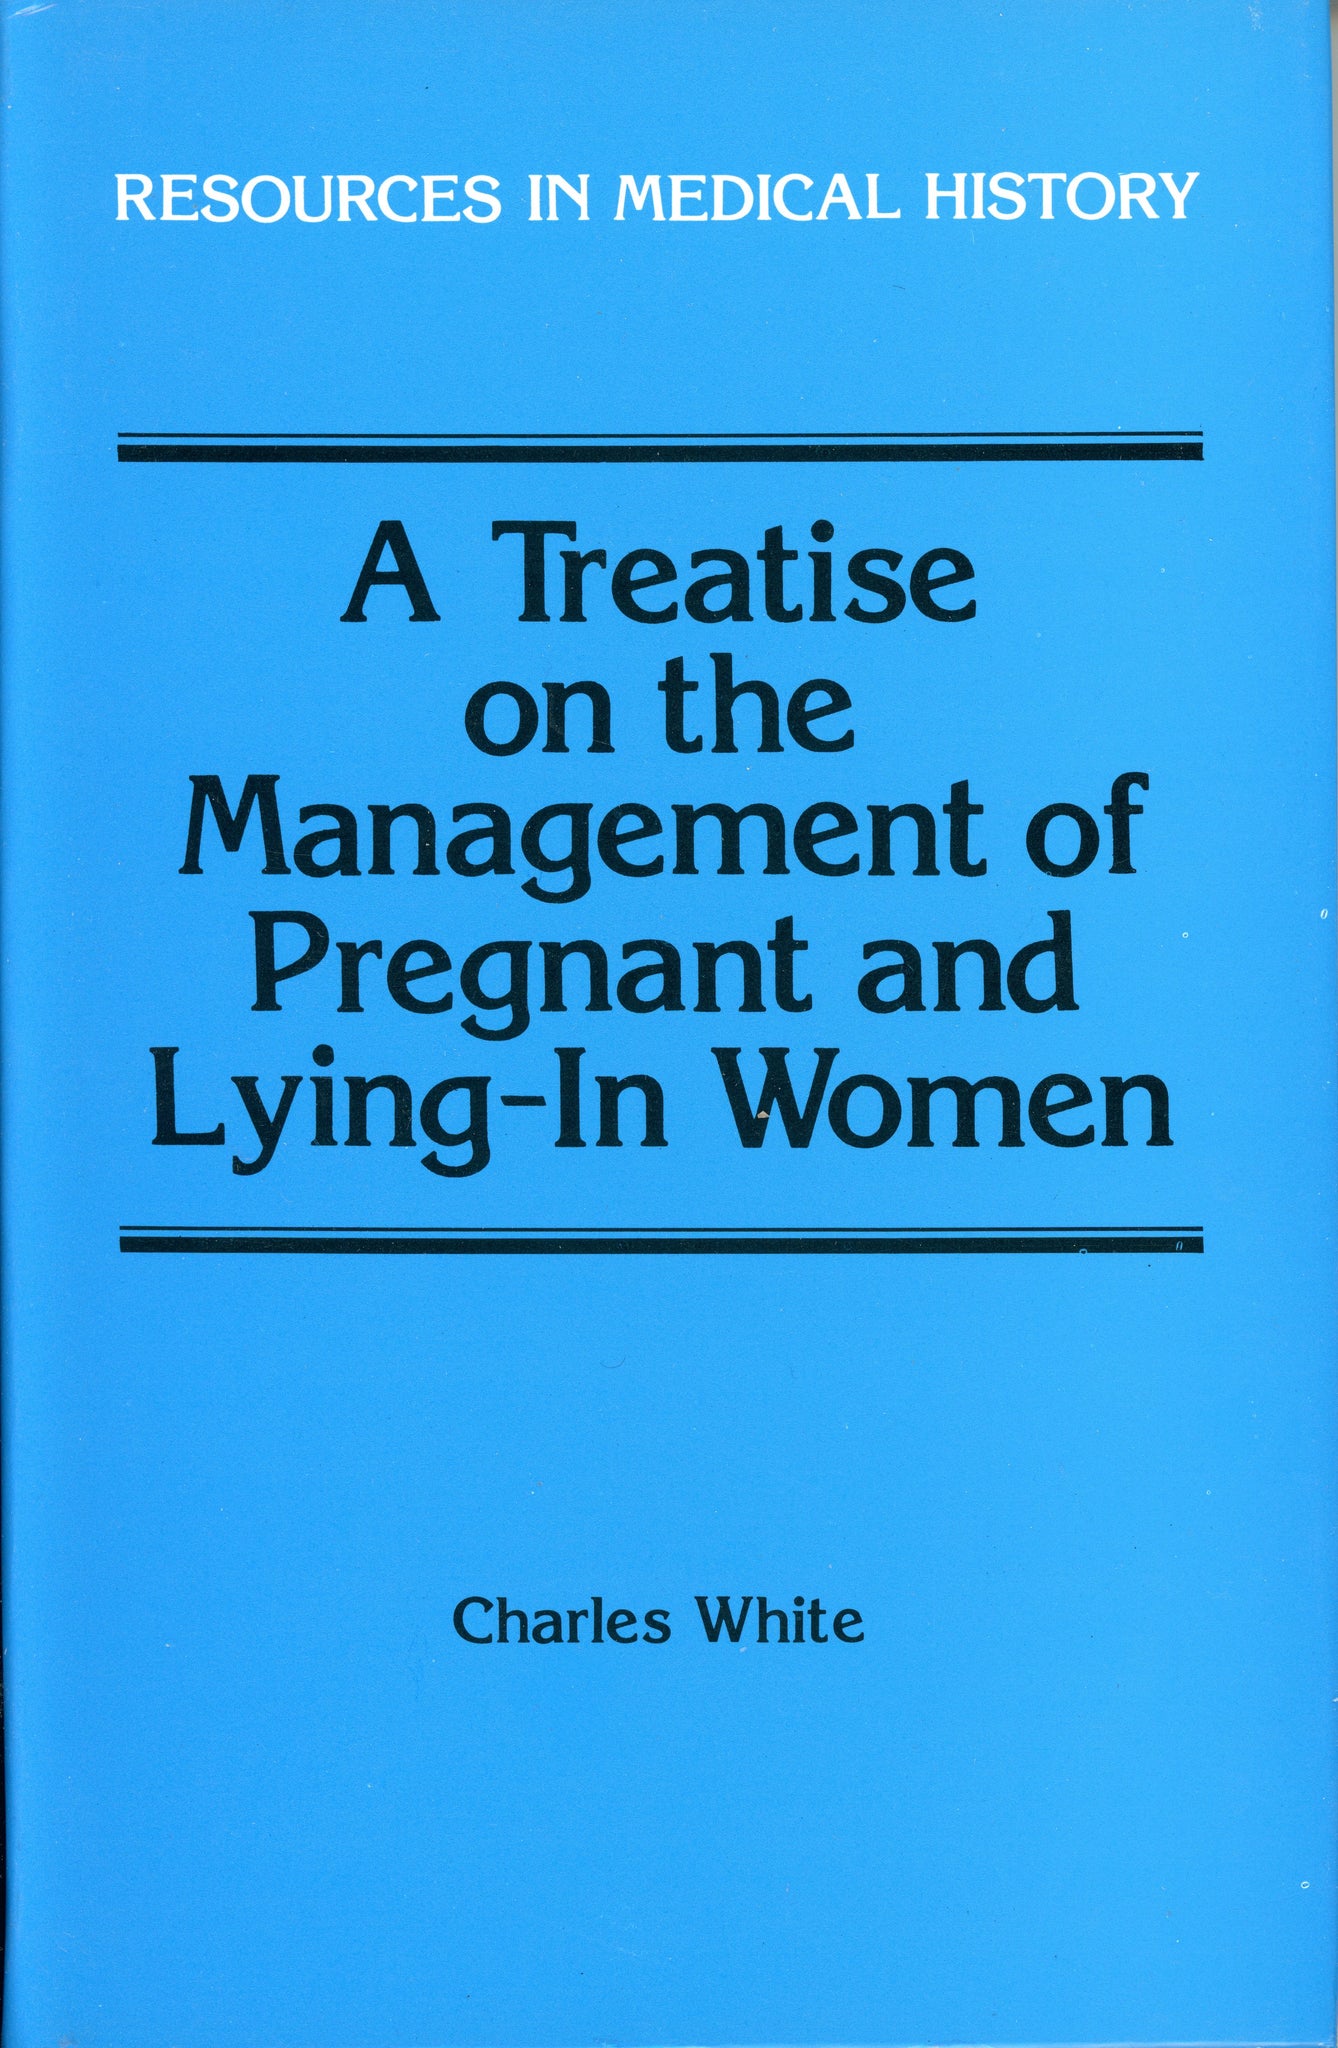 A Treatise on the Management of Pregnant and Lying-In Women